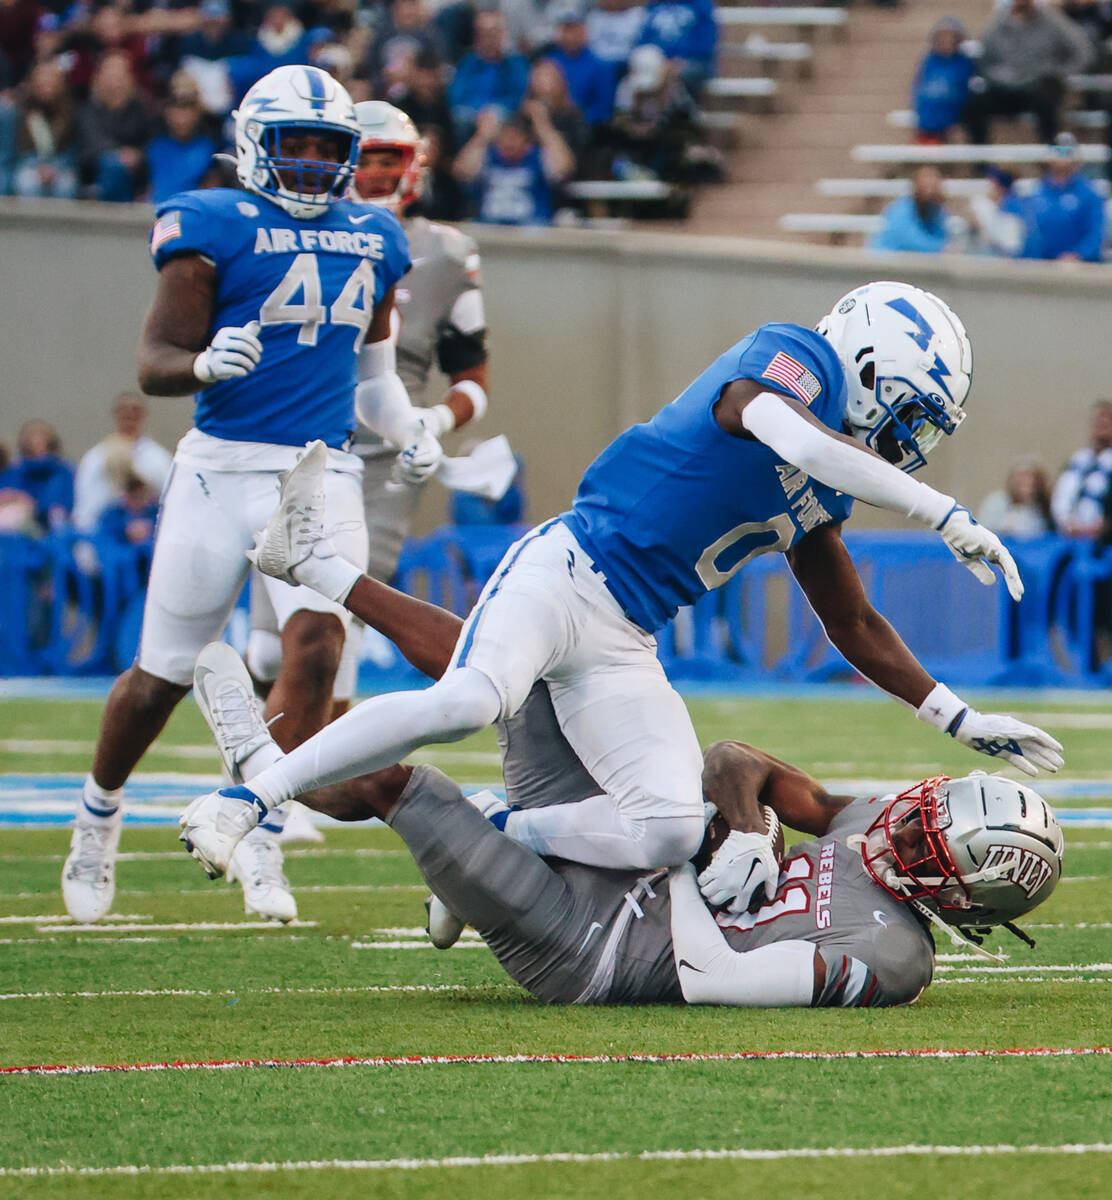 UNLV wide receiver Ricky White (11) falls with the ball as Air Force defensive back Trey Willia ...